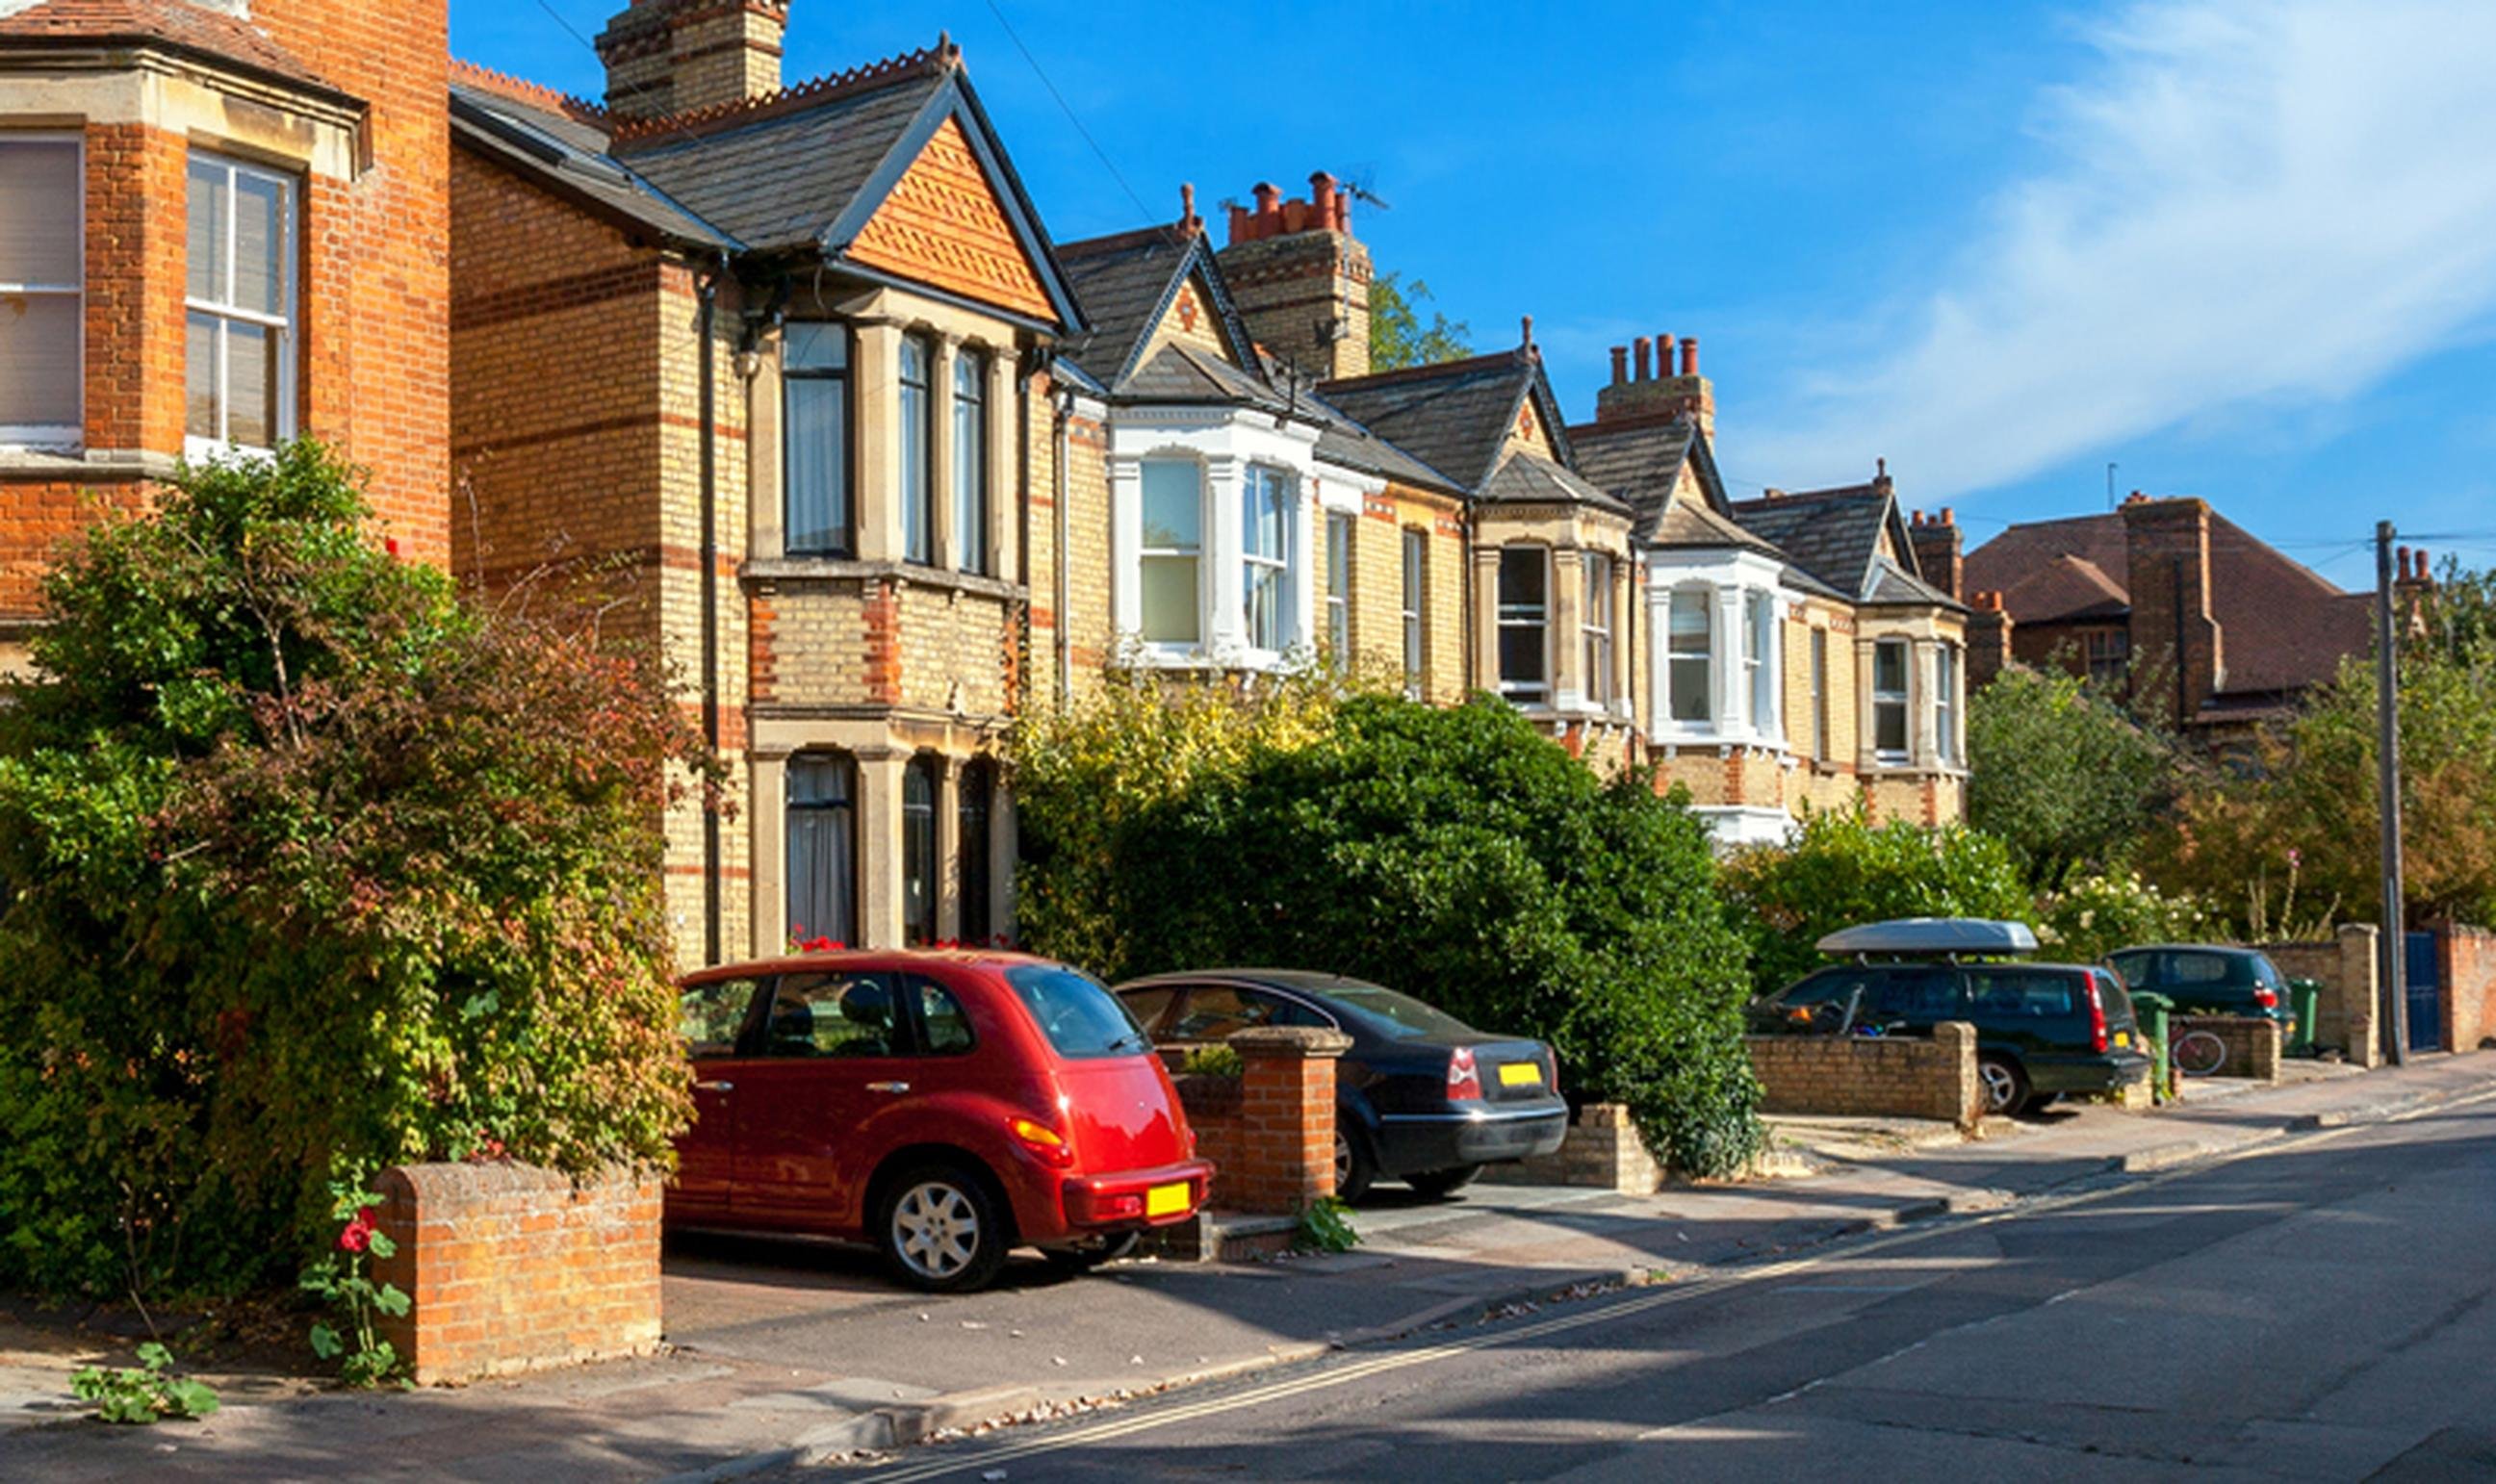 Homeowners made an average of £500 in 2021  by renting their vacant driveways via YourParkingSpace.co.uk